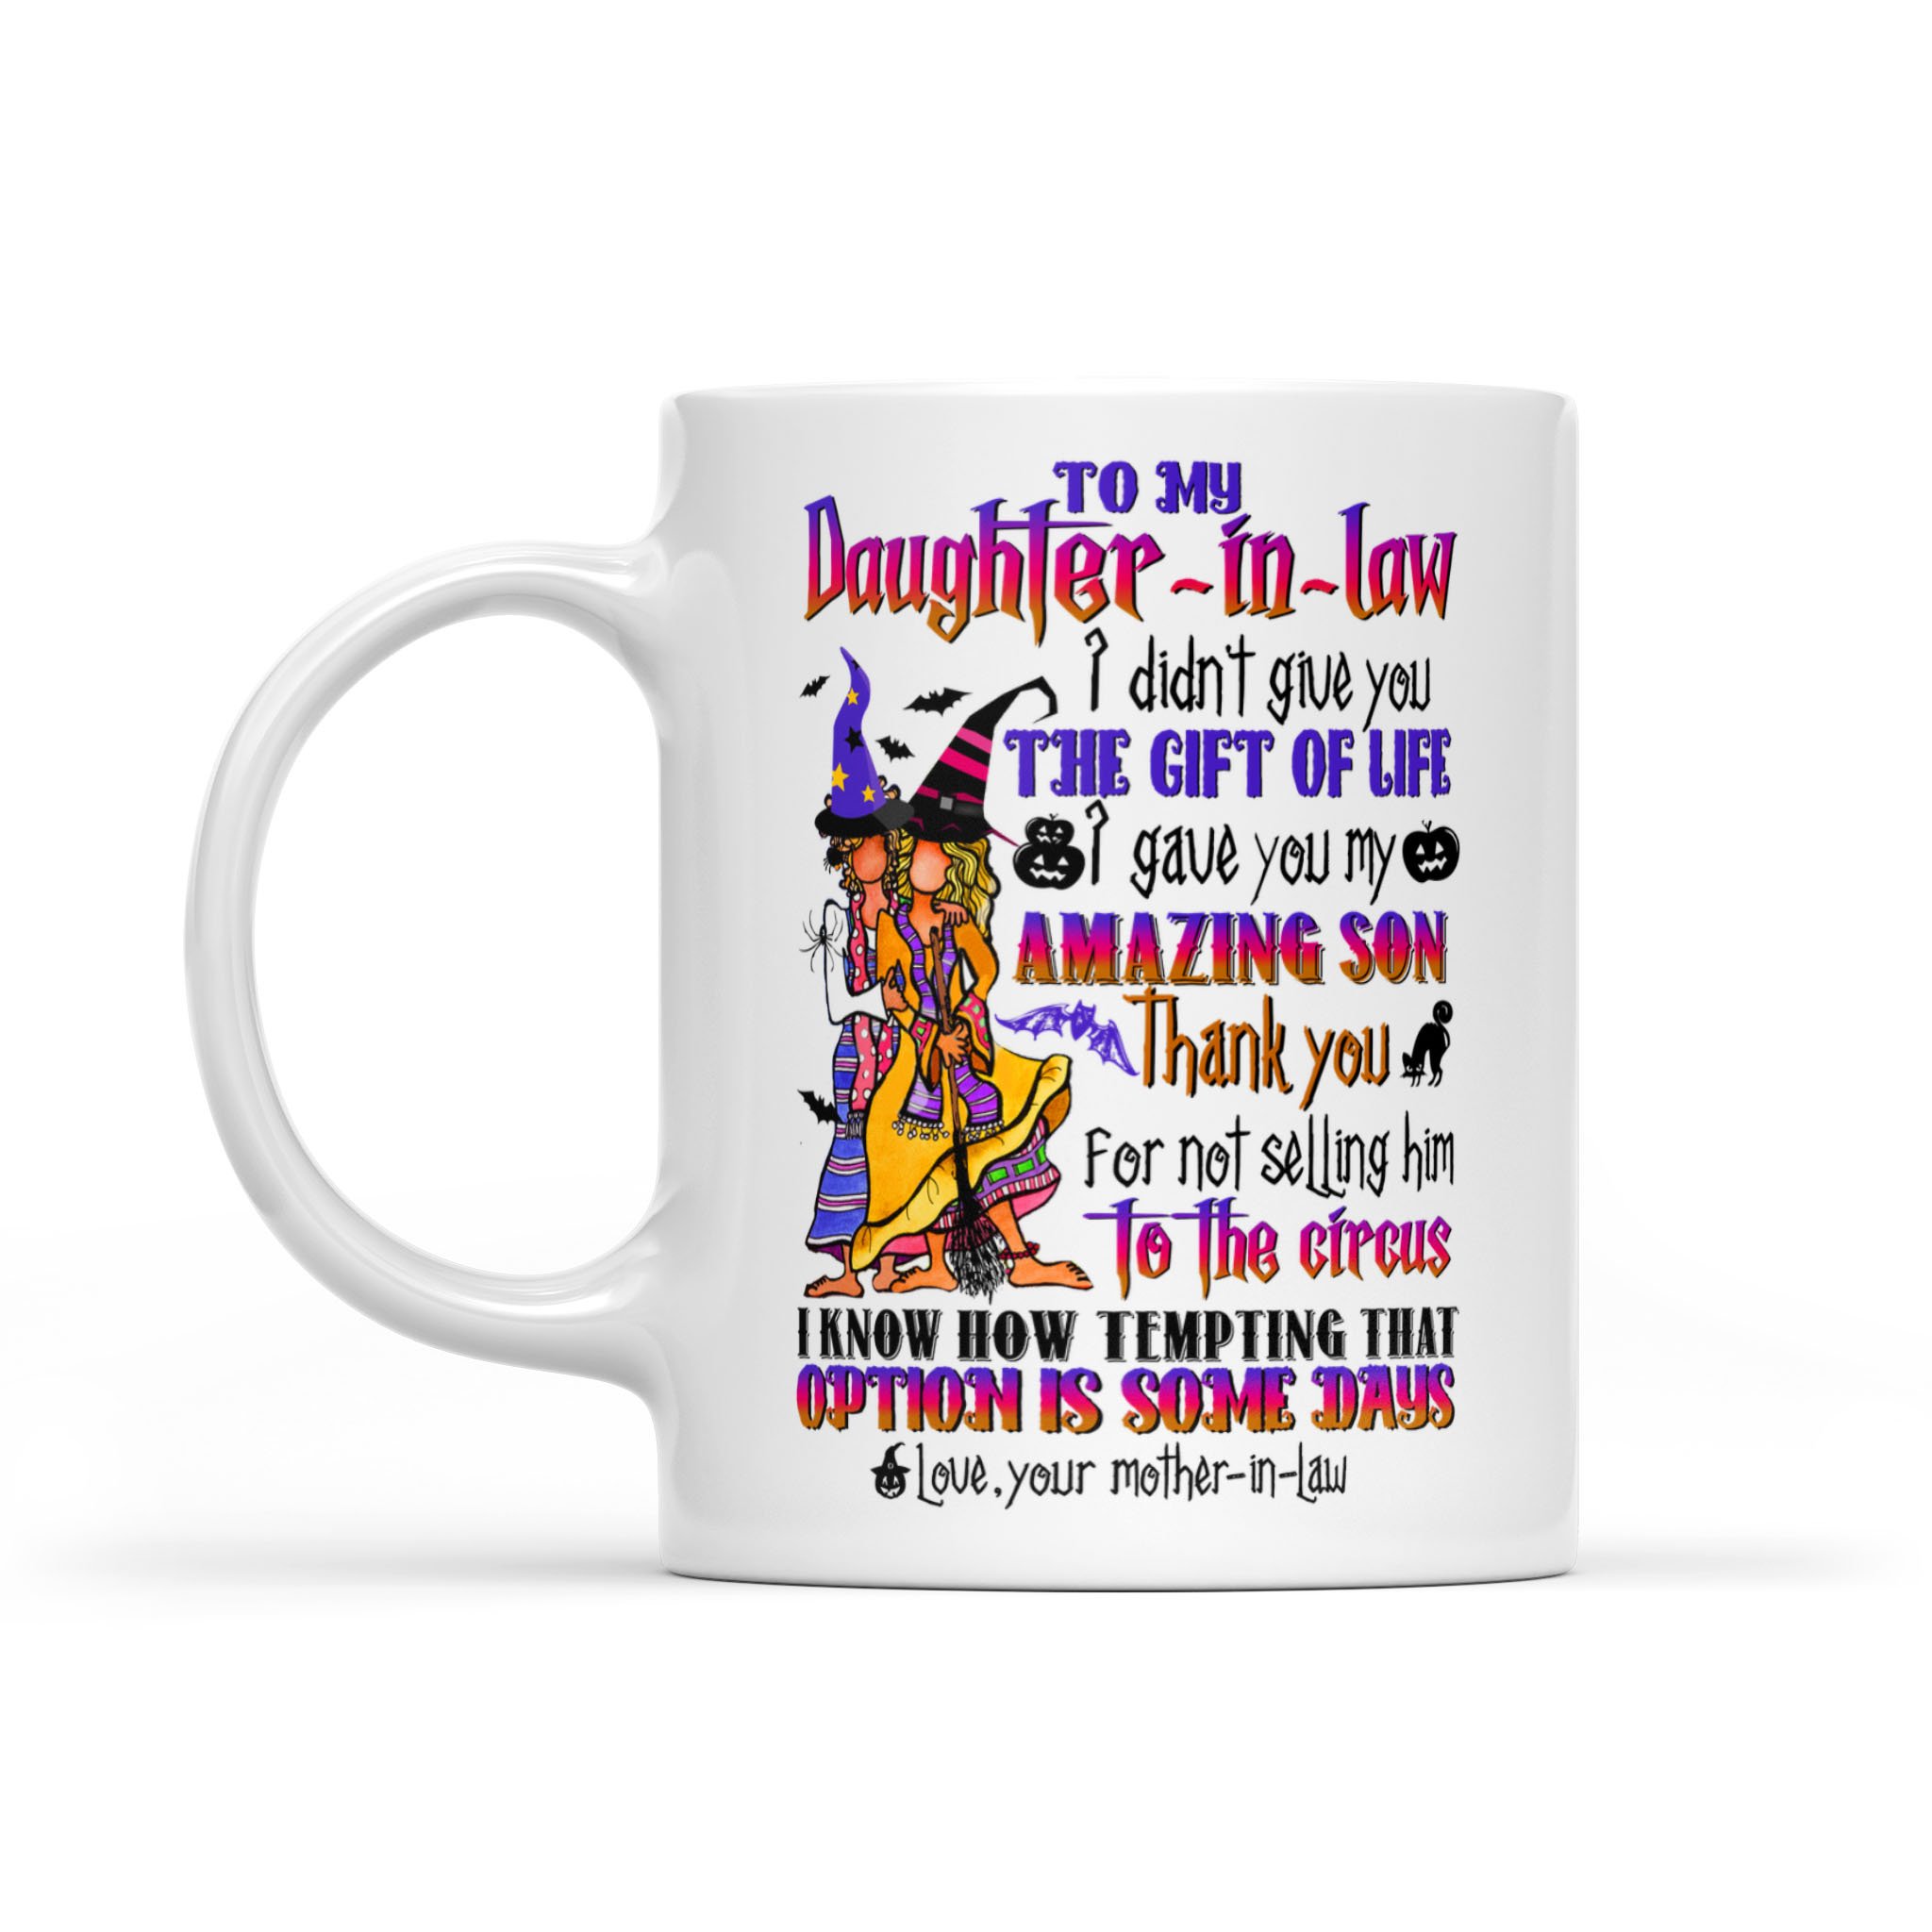 Halloween Gifts For Daughter-in-law – To My Daughter-in-law – I Didn’t Give You The Gift Of Life, I Gave You My Amazing Son Mug